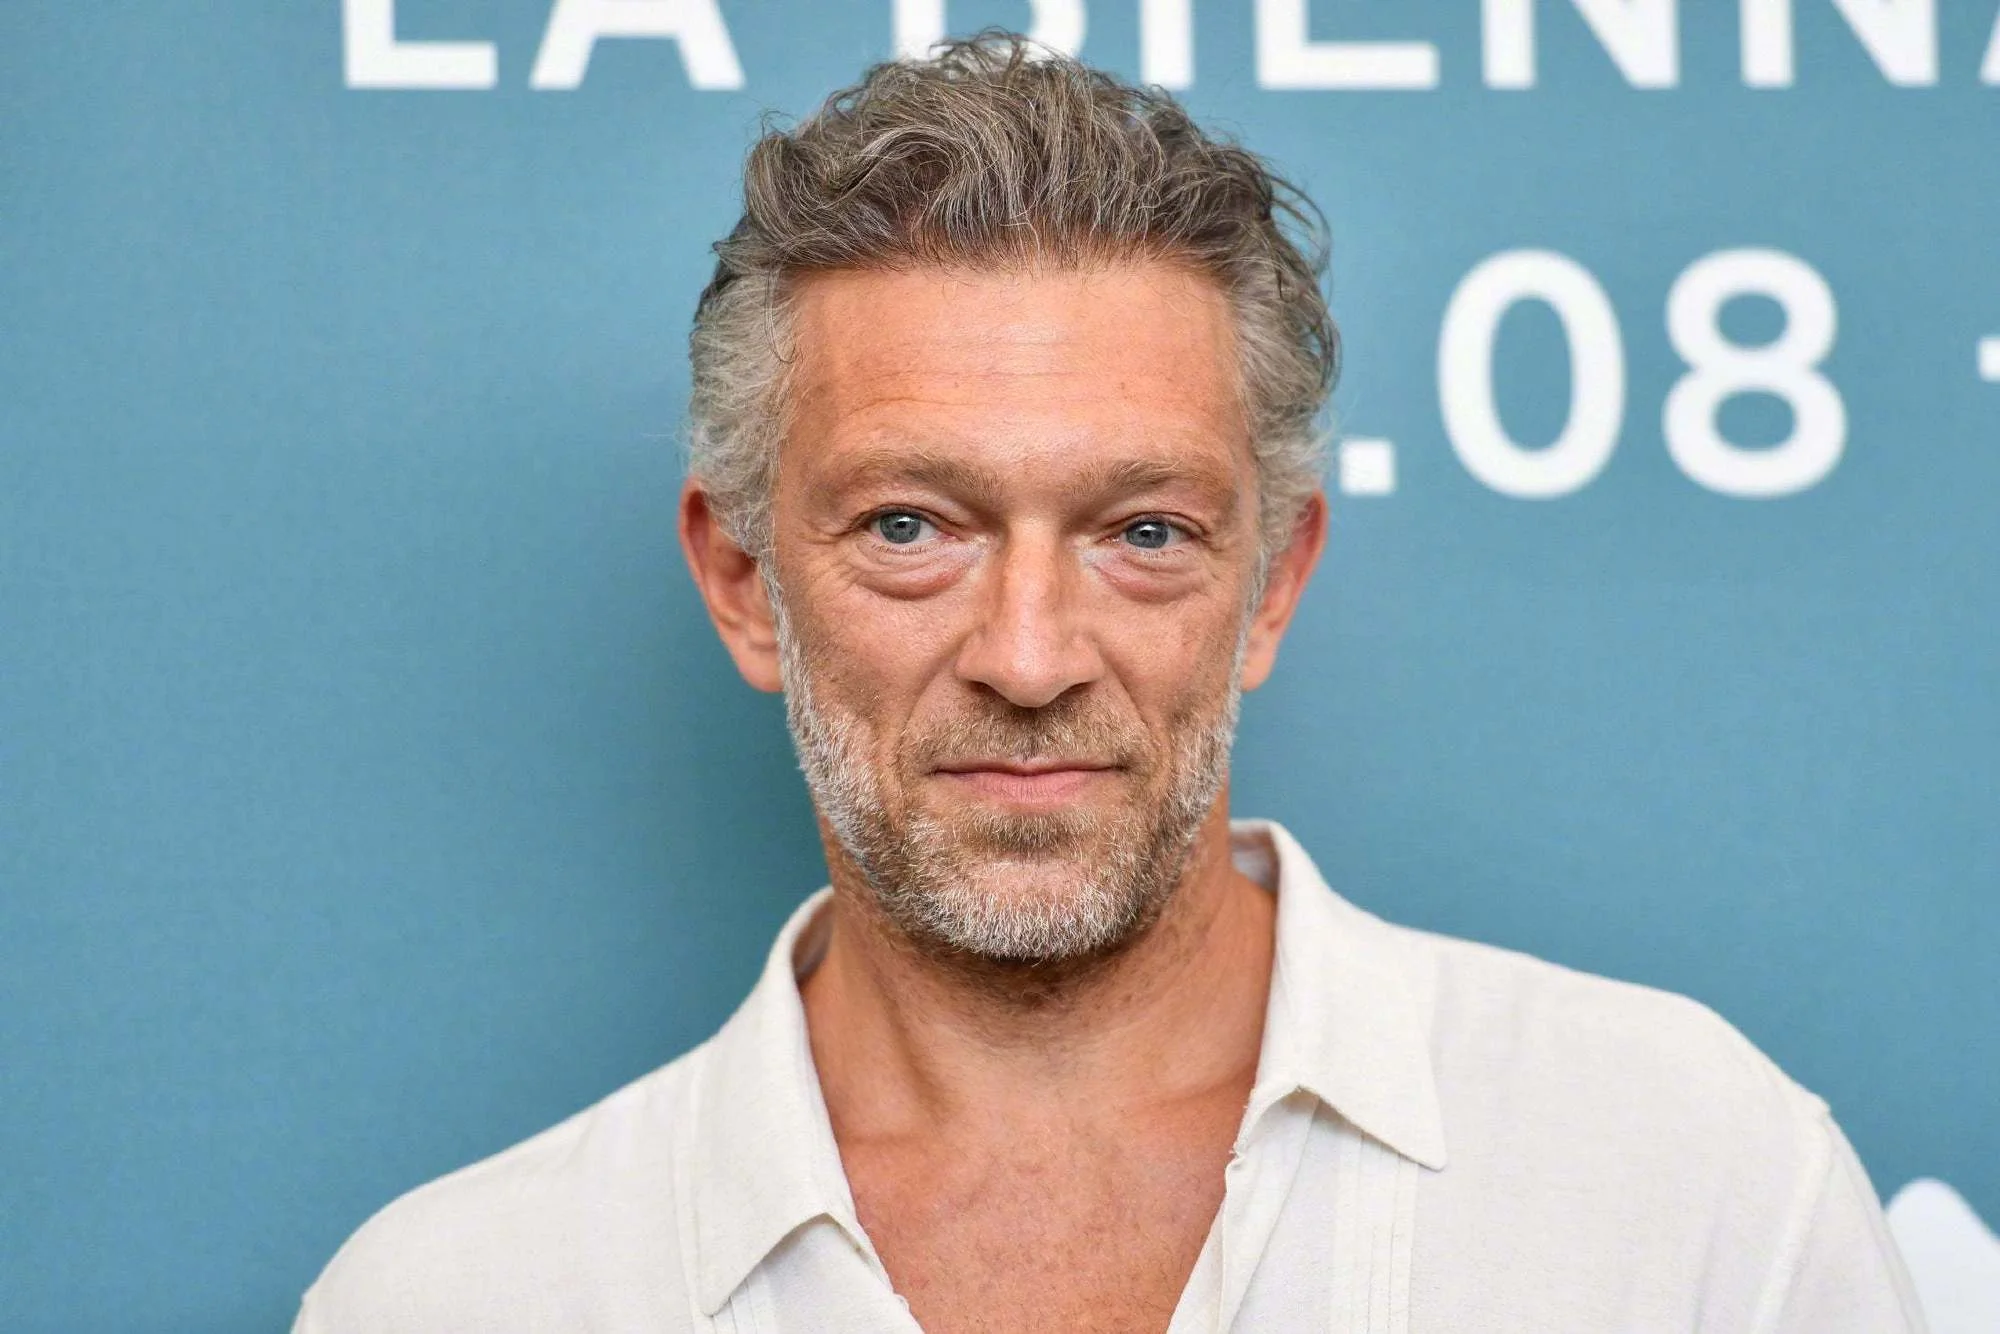 Vincent Cassel to star in new film 'The Shrouds' written and directed by David Cronenberg